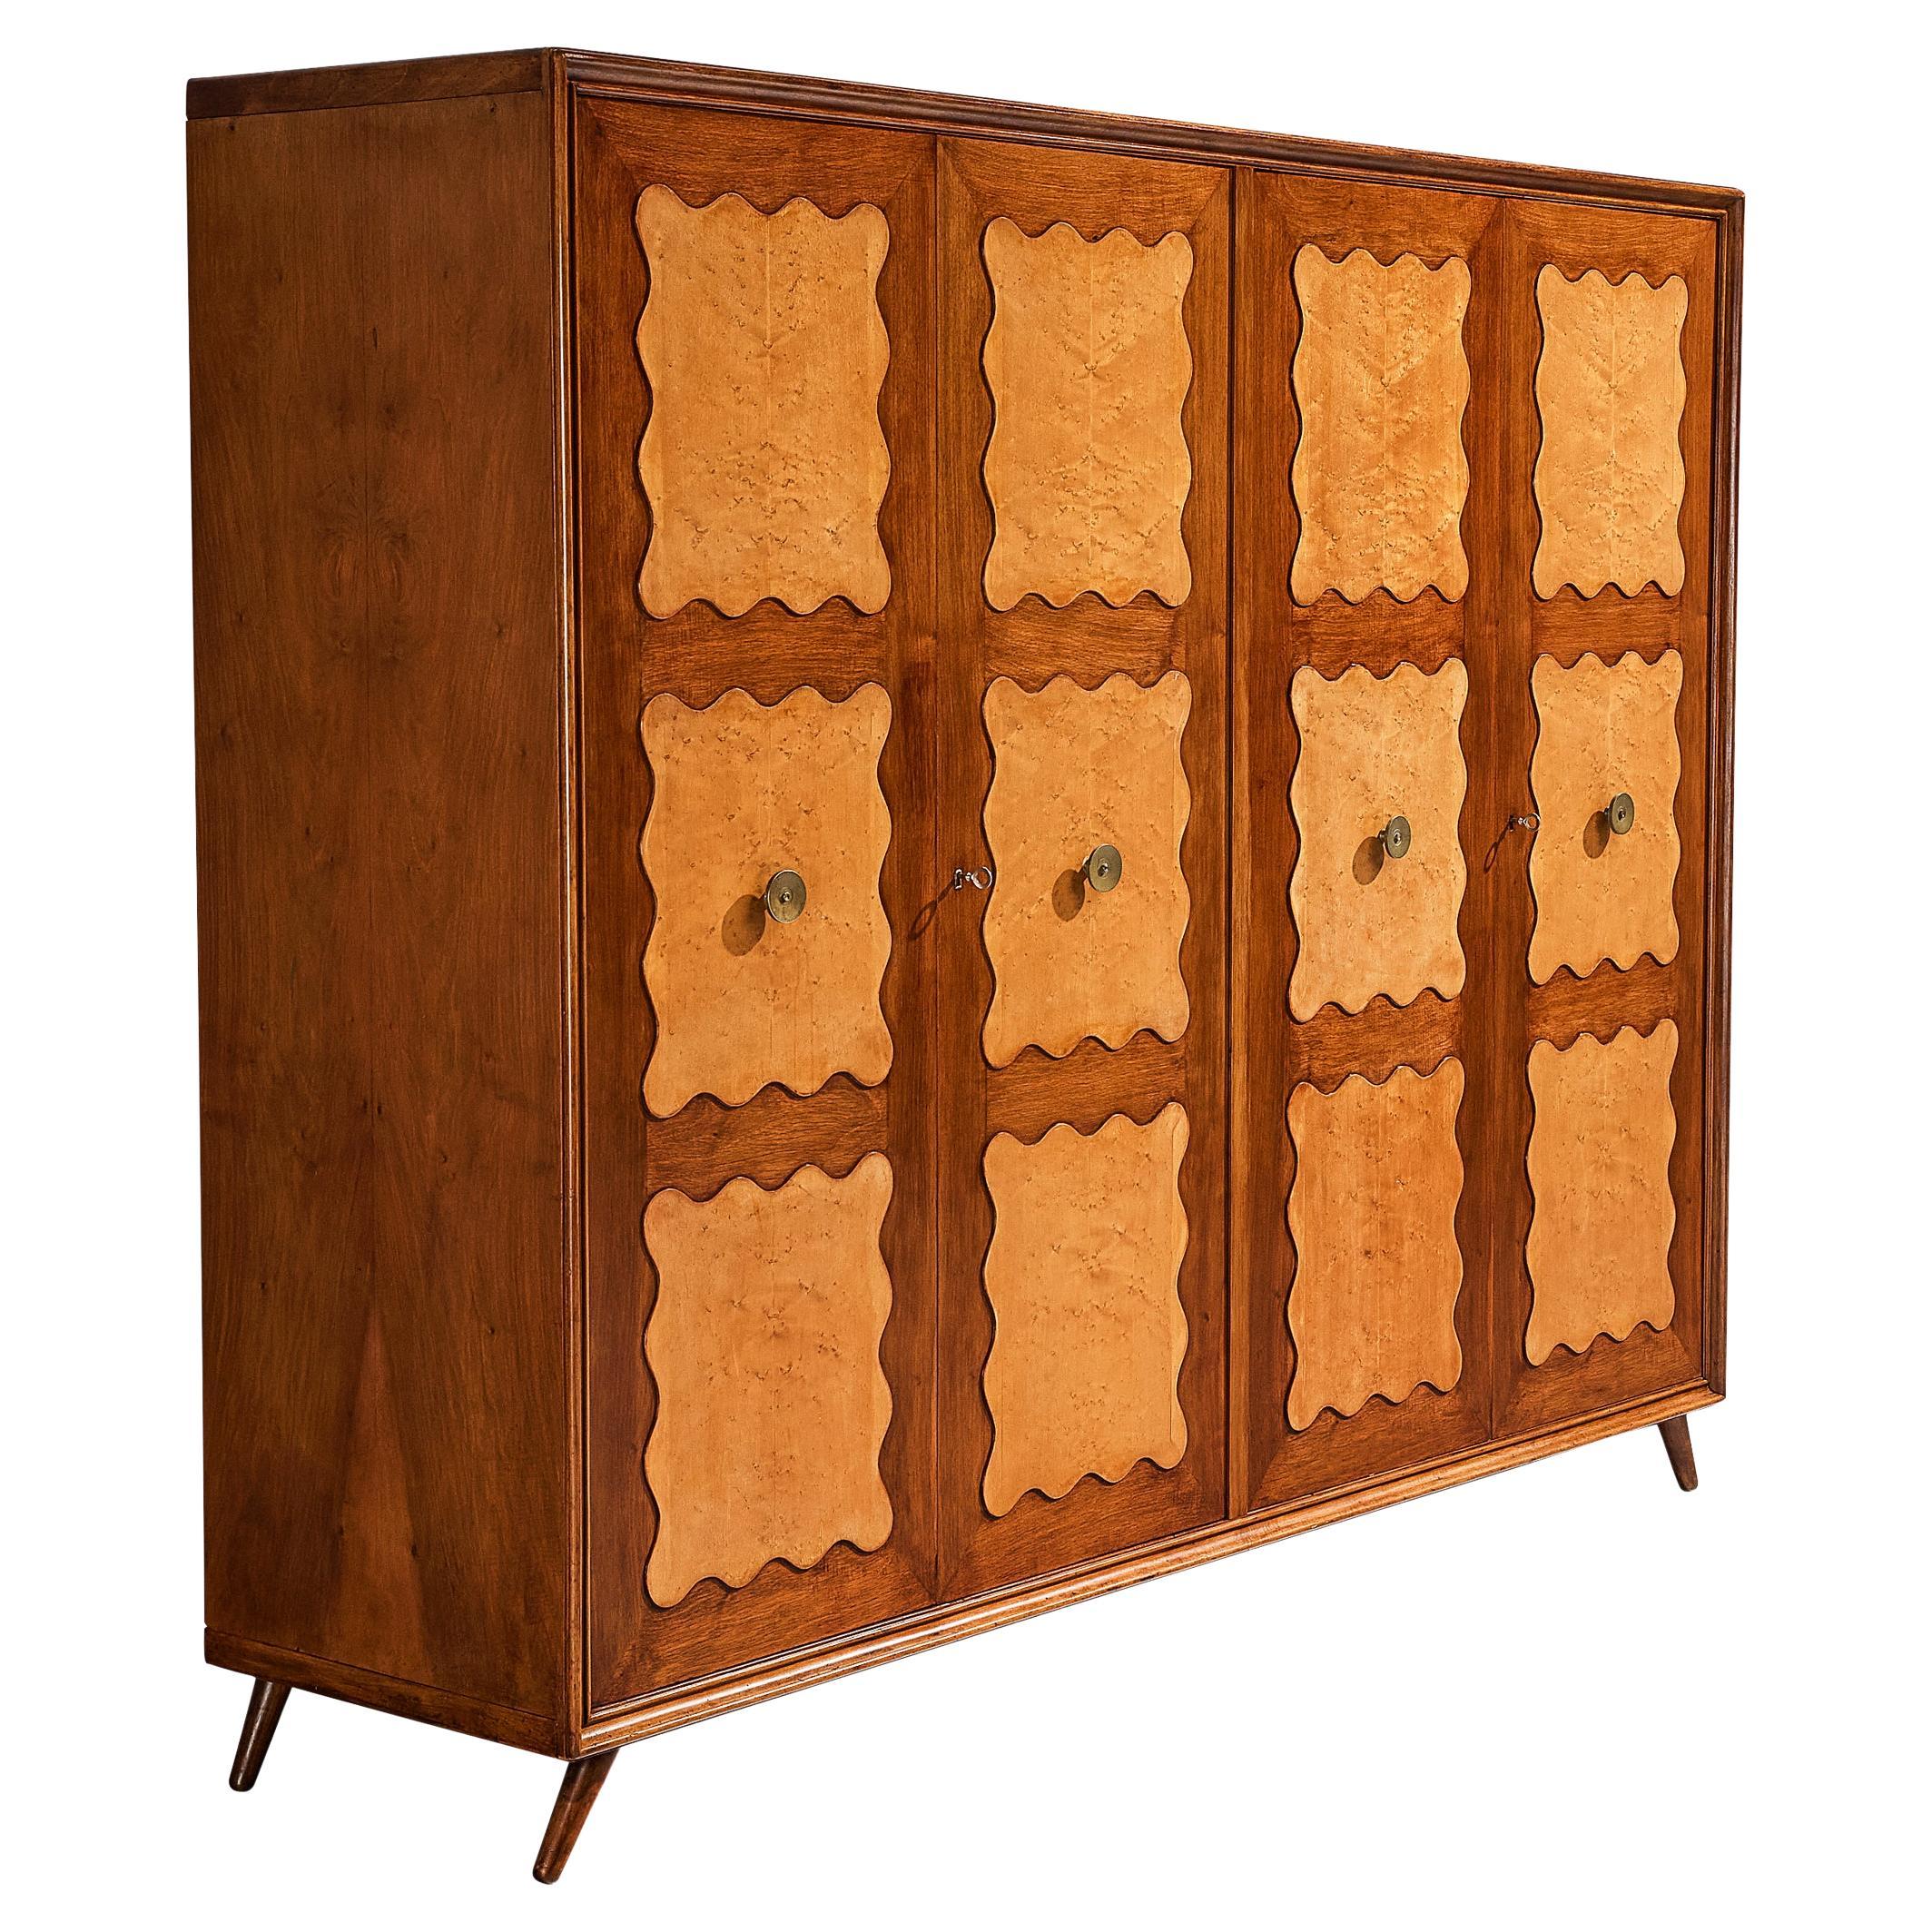 Unique Italian Highboard in Walnut and Birch with Carved Scalloped Front  For Sale